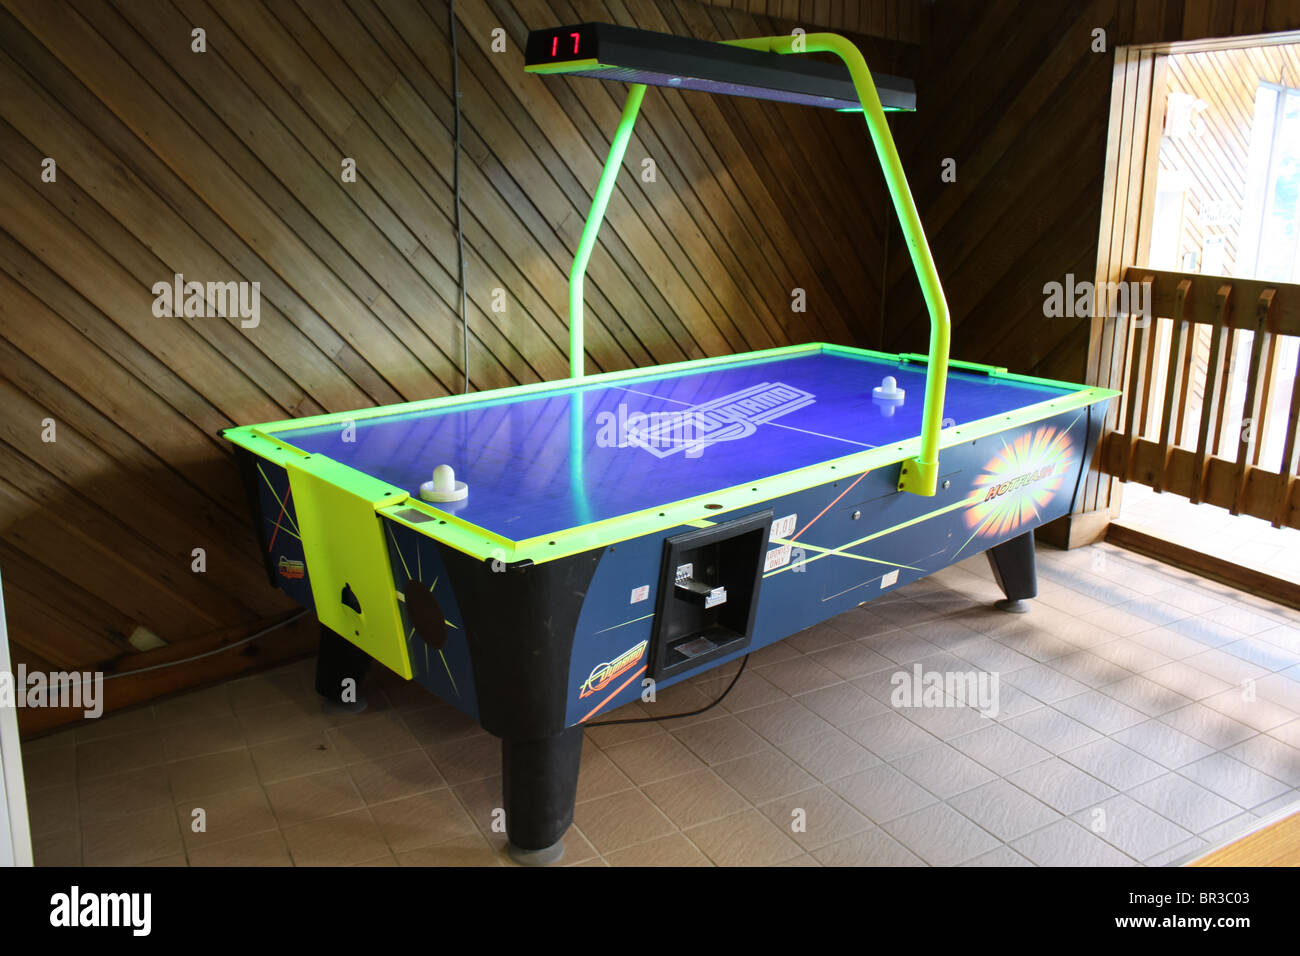 air hockey table hotel game room Stock Photo